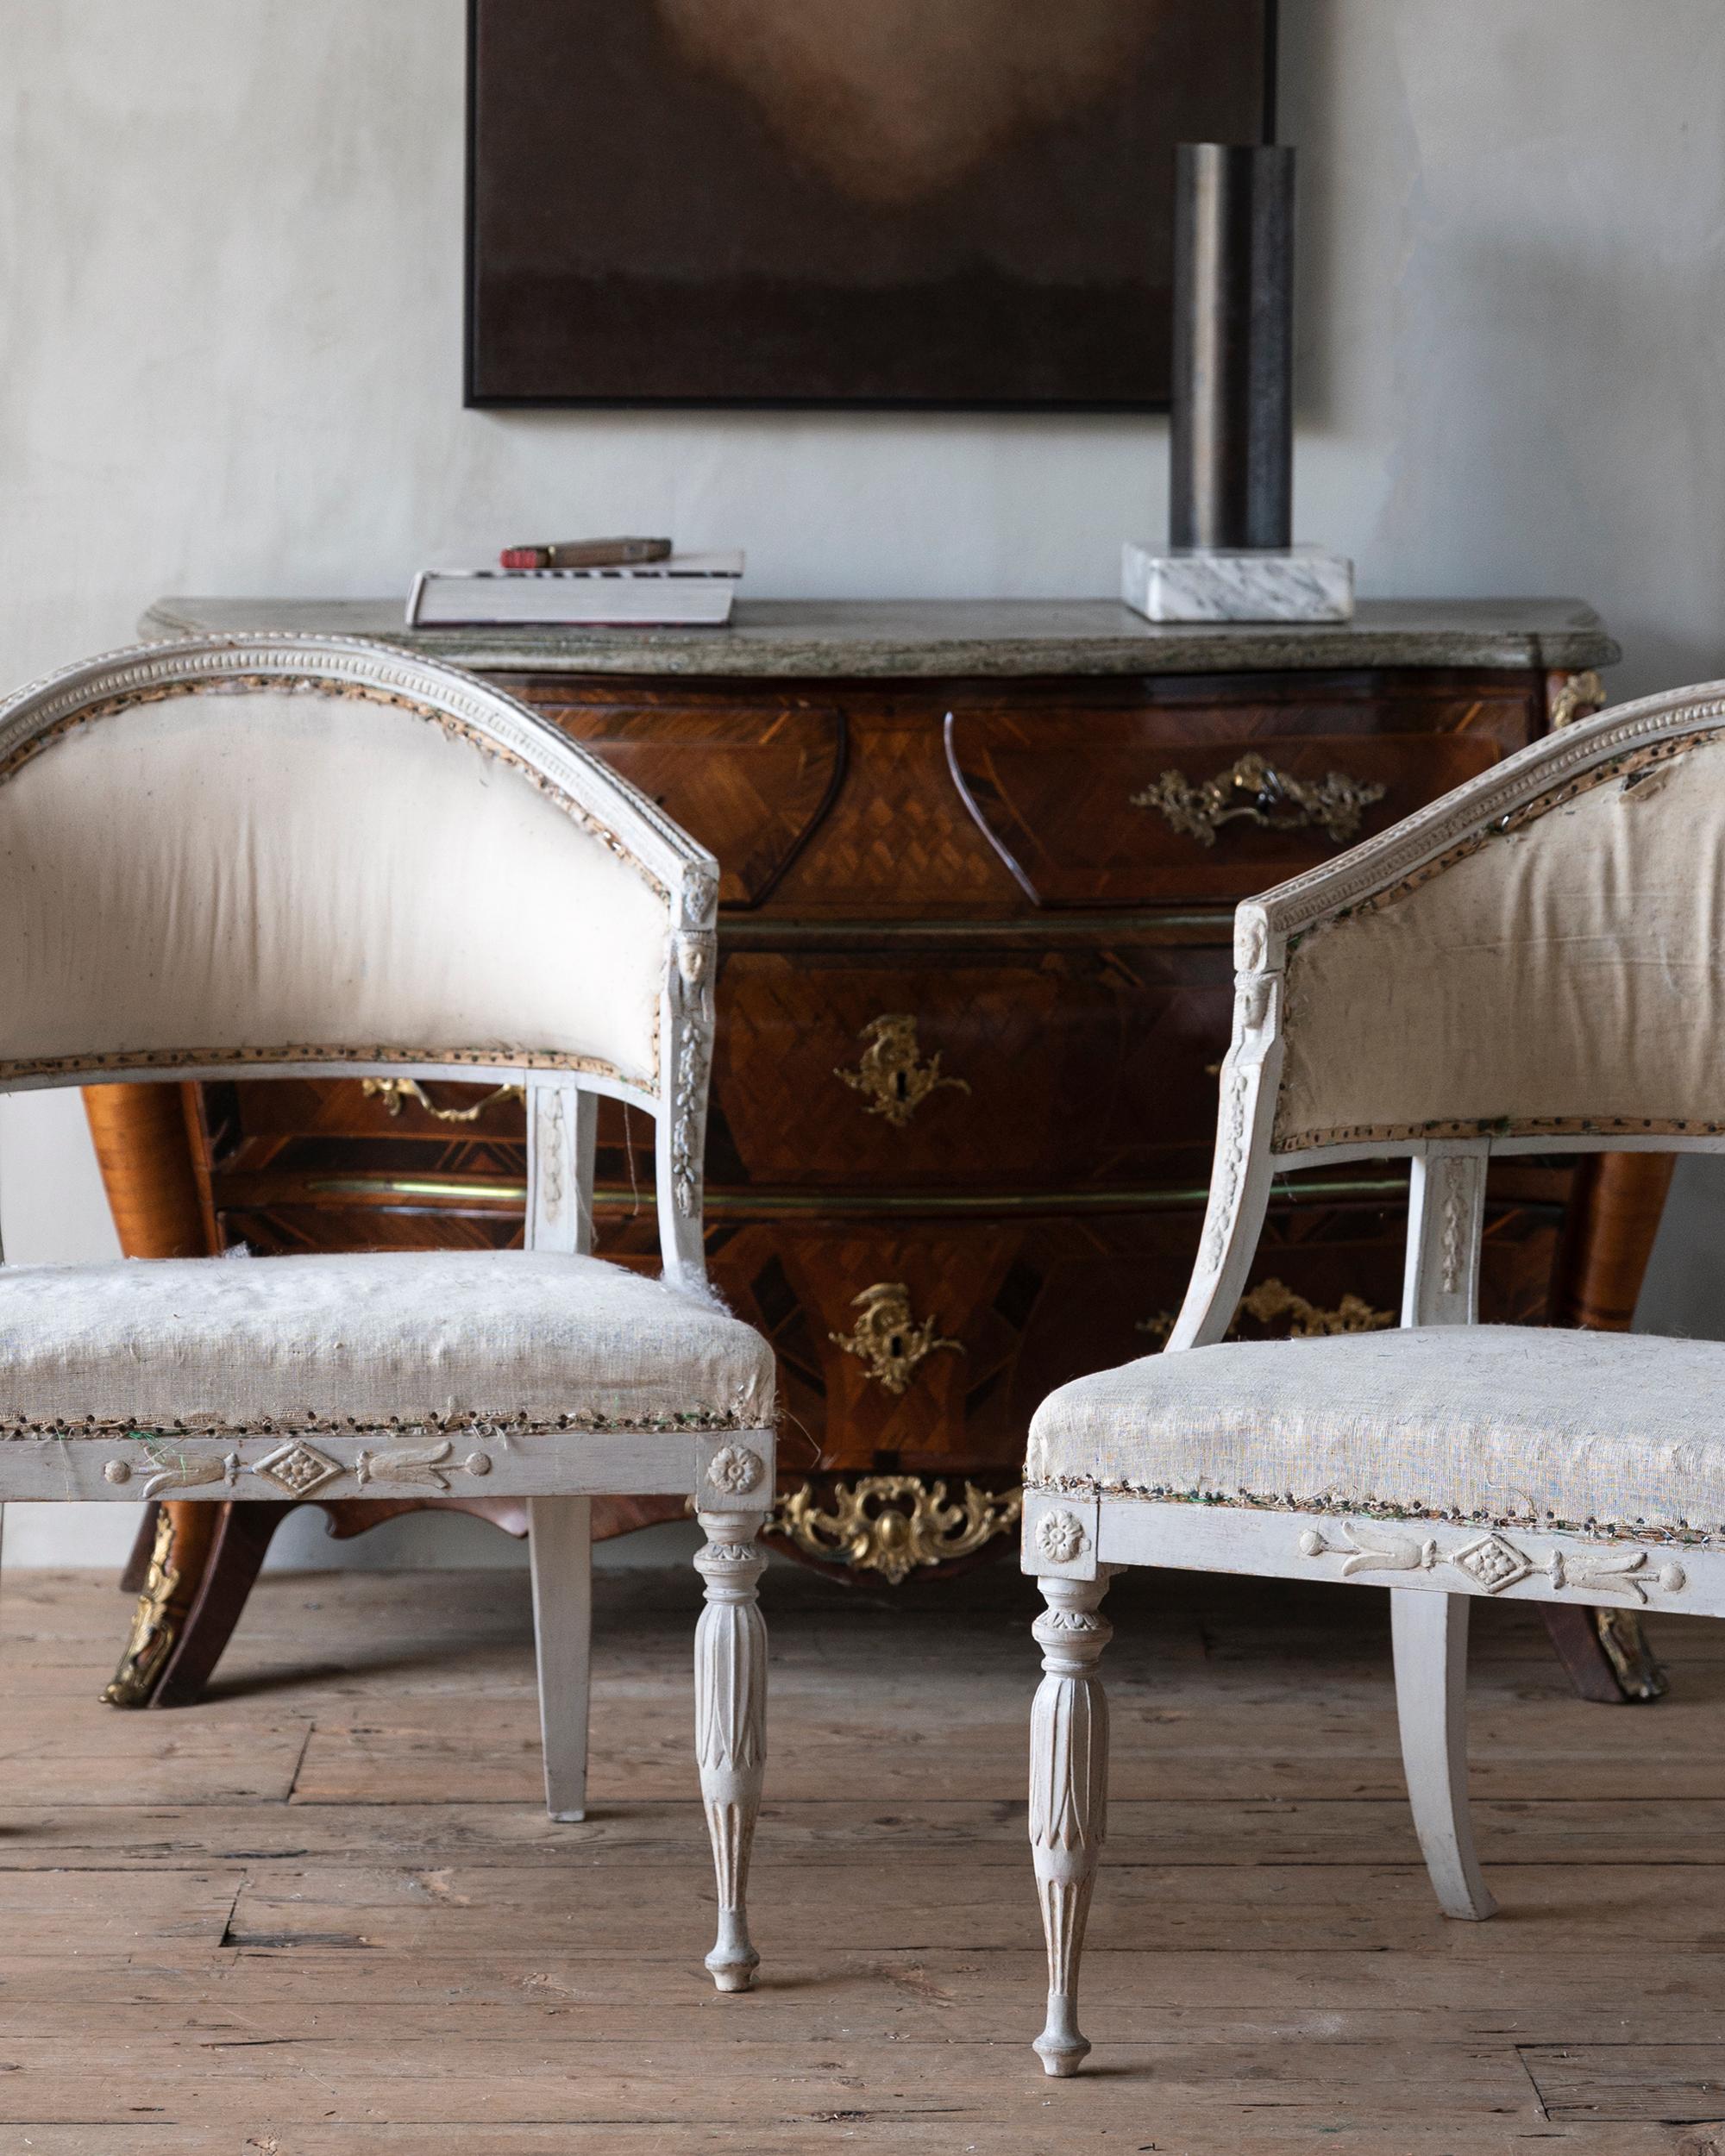 Fine pair of early 19th century Gustavian barrel back armchairs in Egyptian taste. Ca 1810 Stockholm, Sweden. 

Attributed to Ephraim Stahl (1767-1820) Supplier to the Royal Court and one of the most sophisticated and inventive makers of his period. 